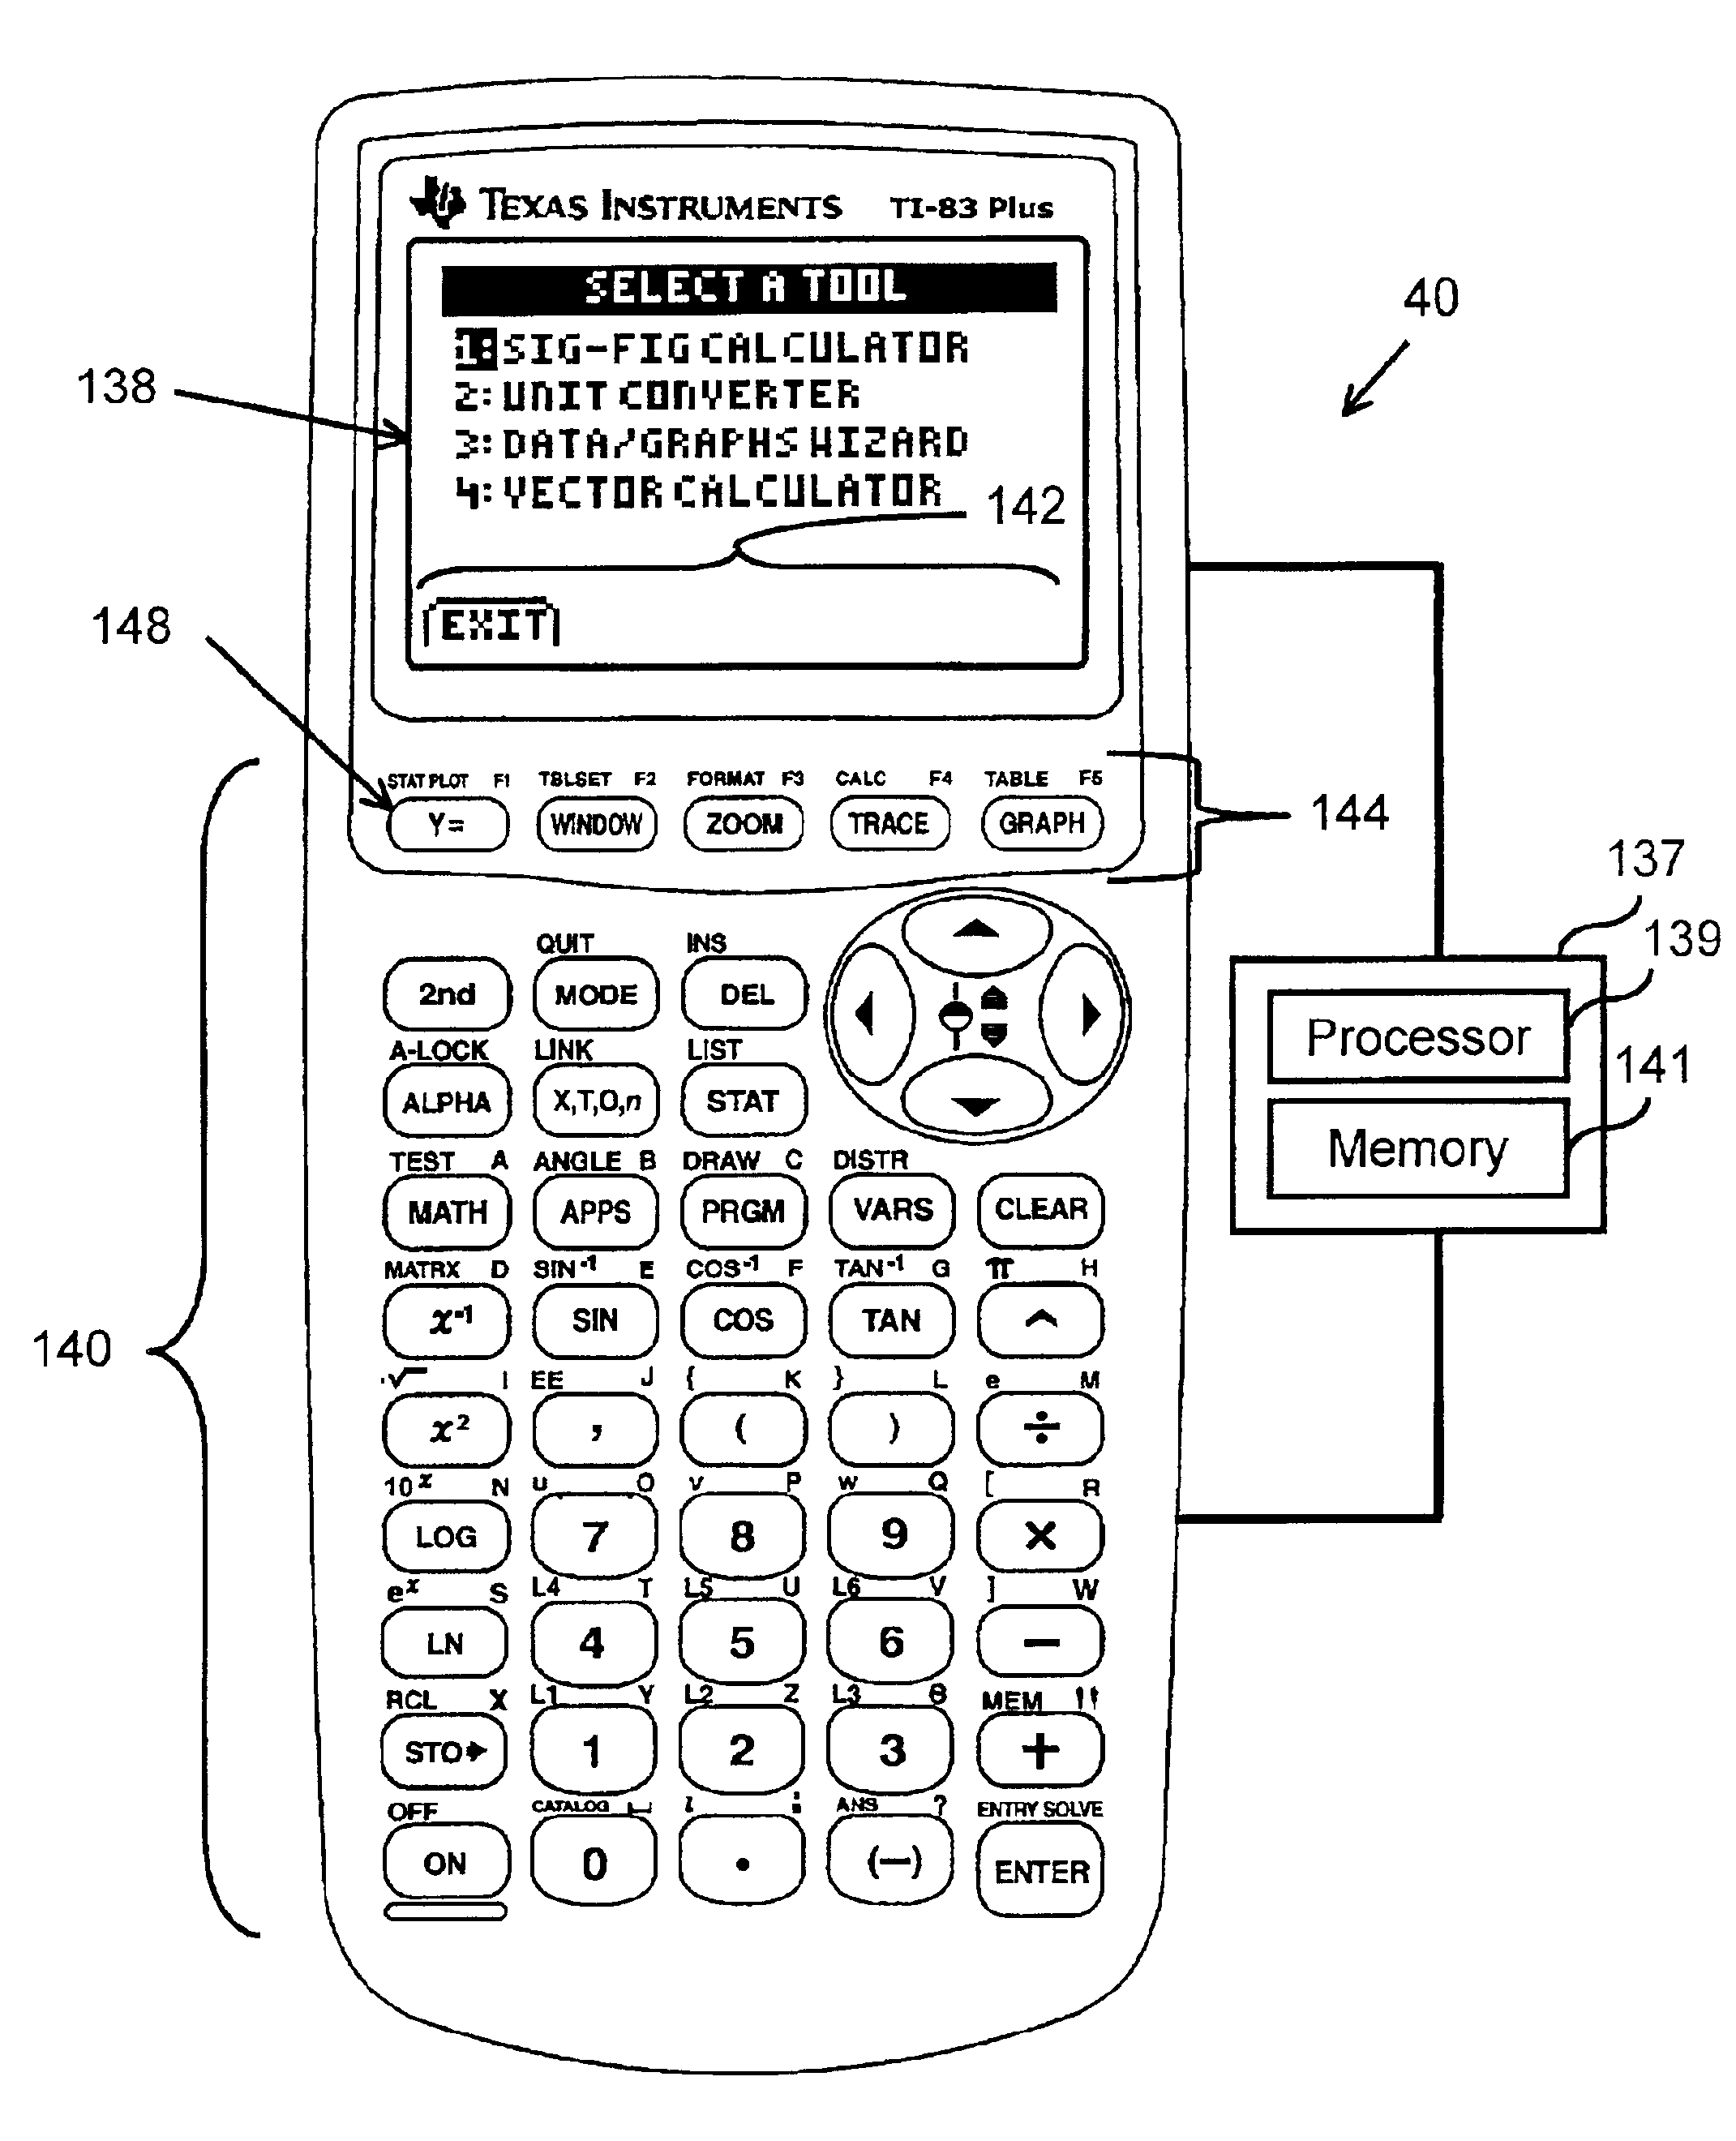 Apparatus and method for simultaneously displaying a number along with its number of significant figures